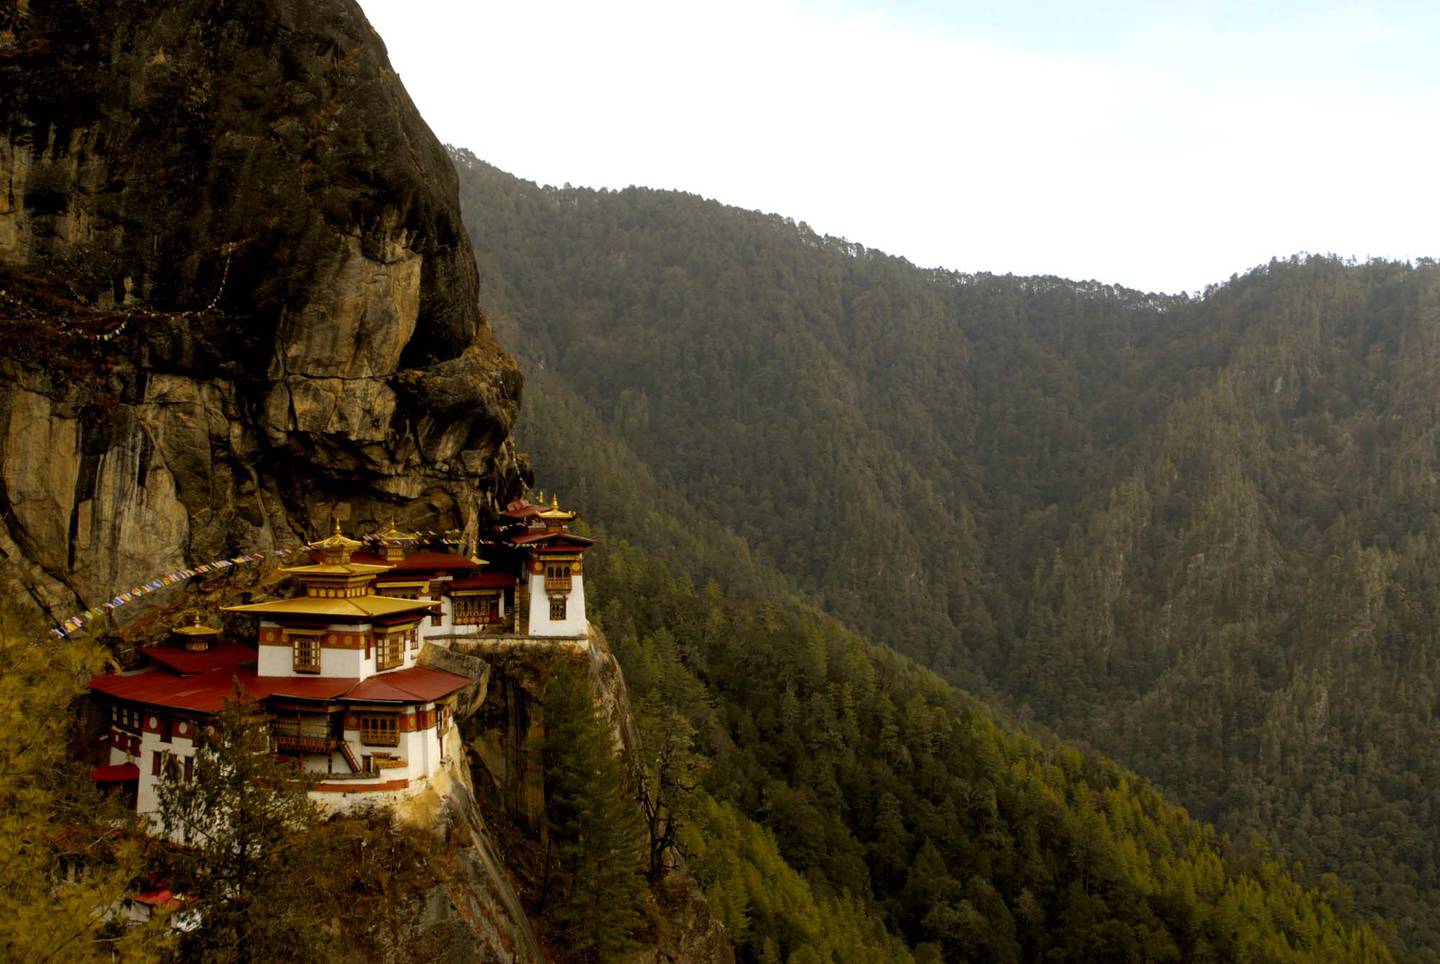 Bhutan - Tiger's Nest monastery  (Kipat Wilson for The National) Travel Story PHOTOS SUBMITTED ON SPECULATION